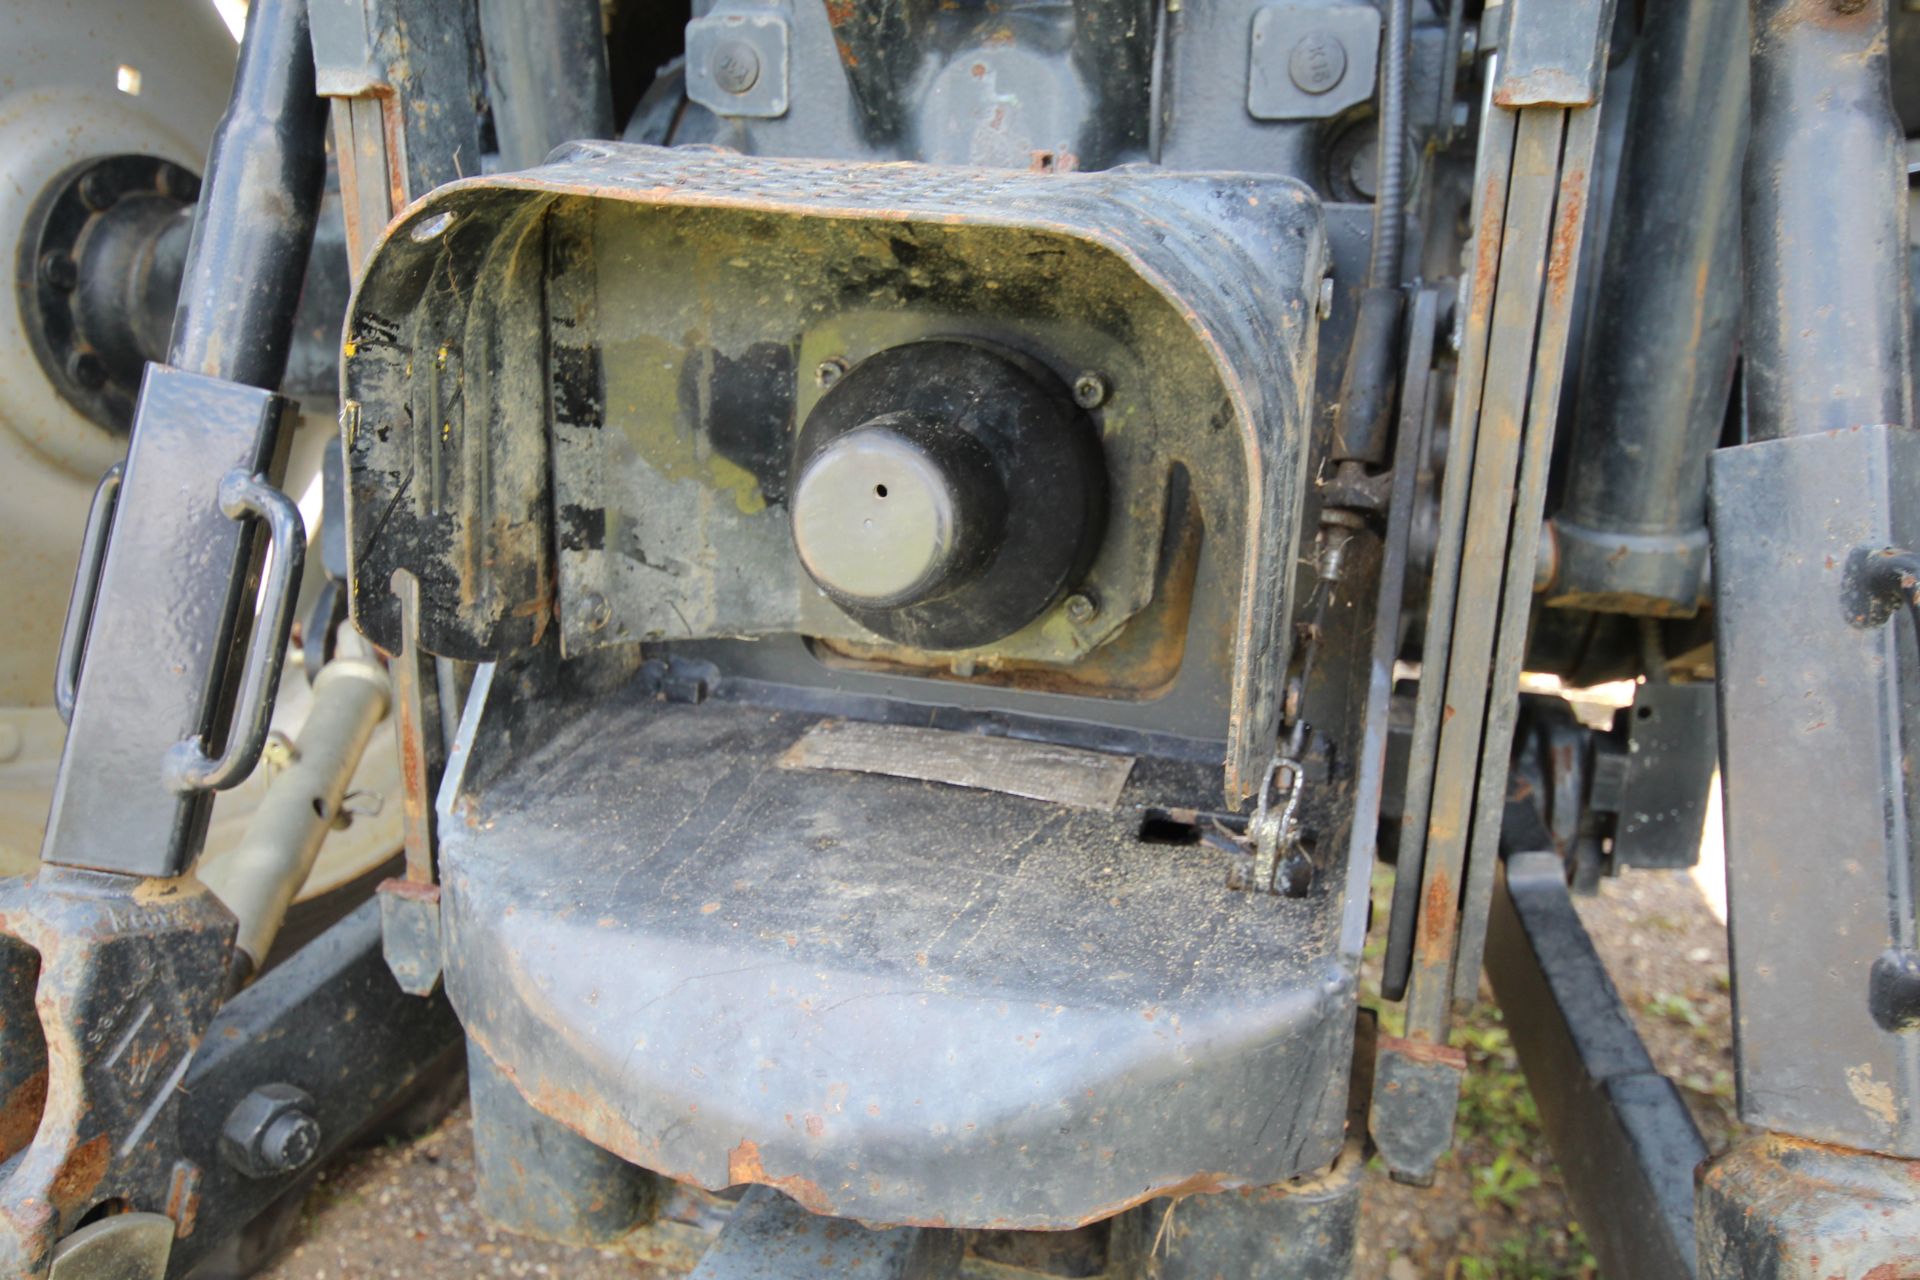 Case 110X 4WD tractor. Registration EU09 HGN. Date - Image 36 of 93